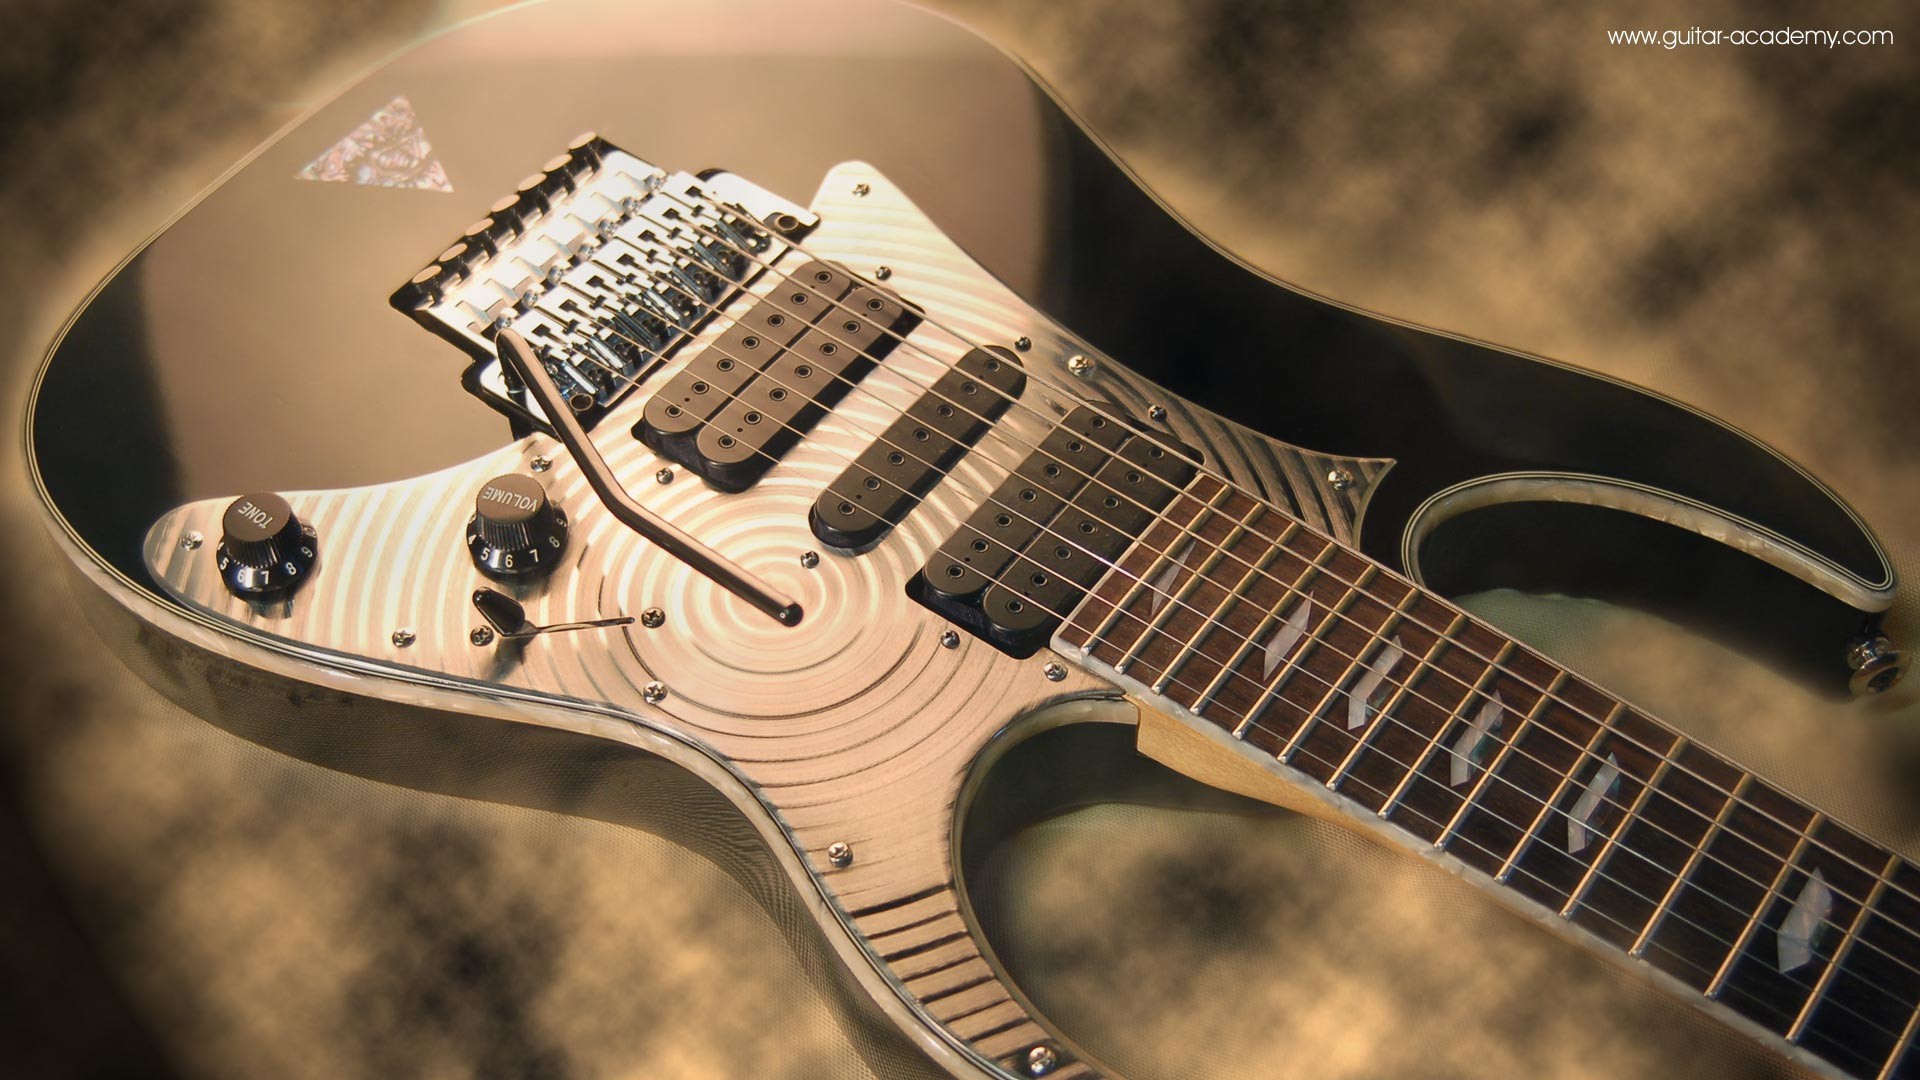 1920x1080 Search Results for “ibanez guitar hd wallpaper” – Adorable Wallpapers